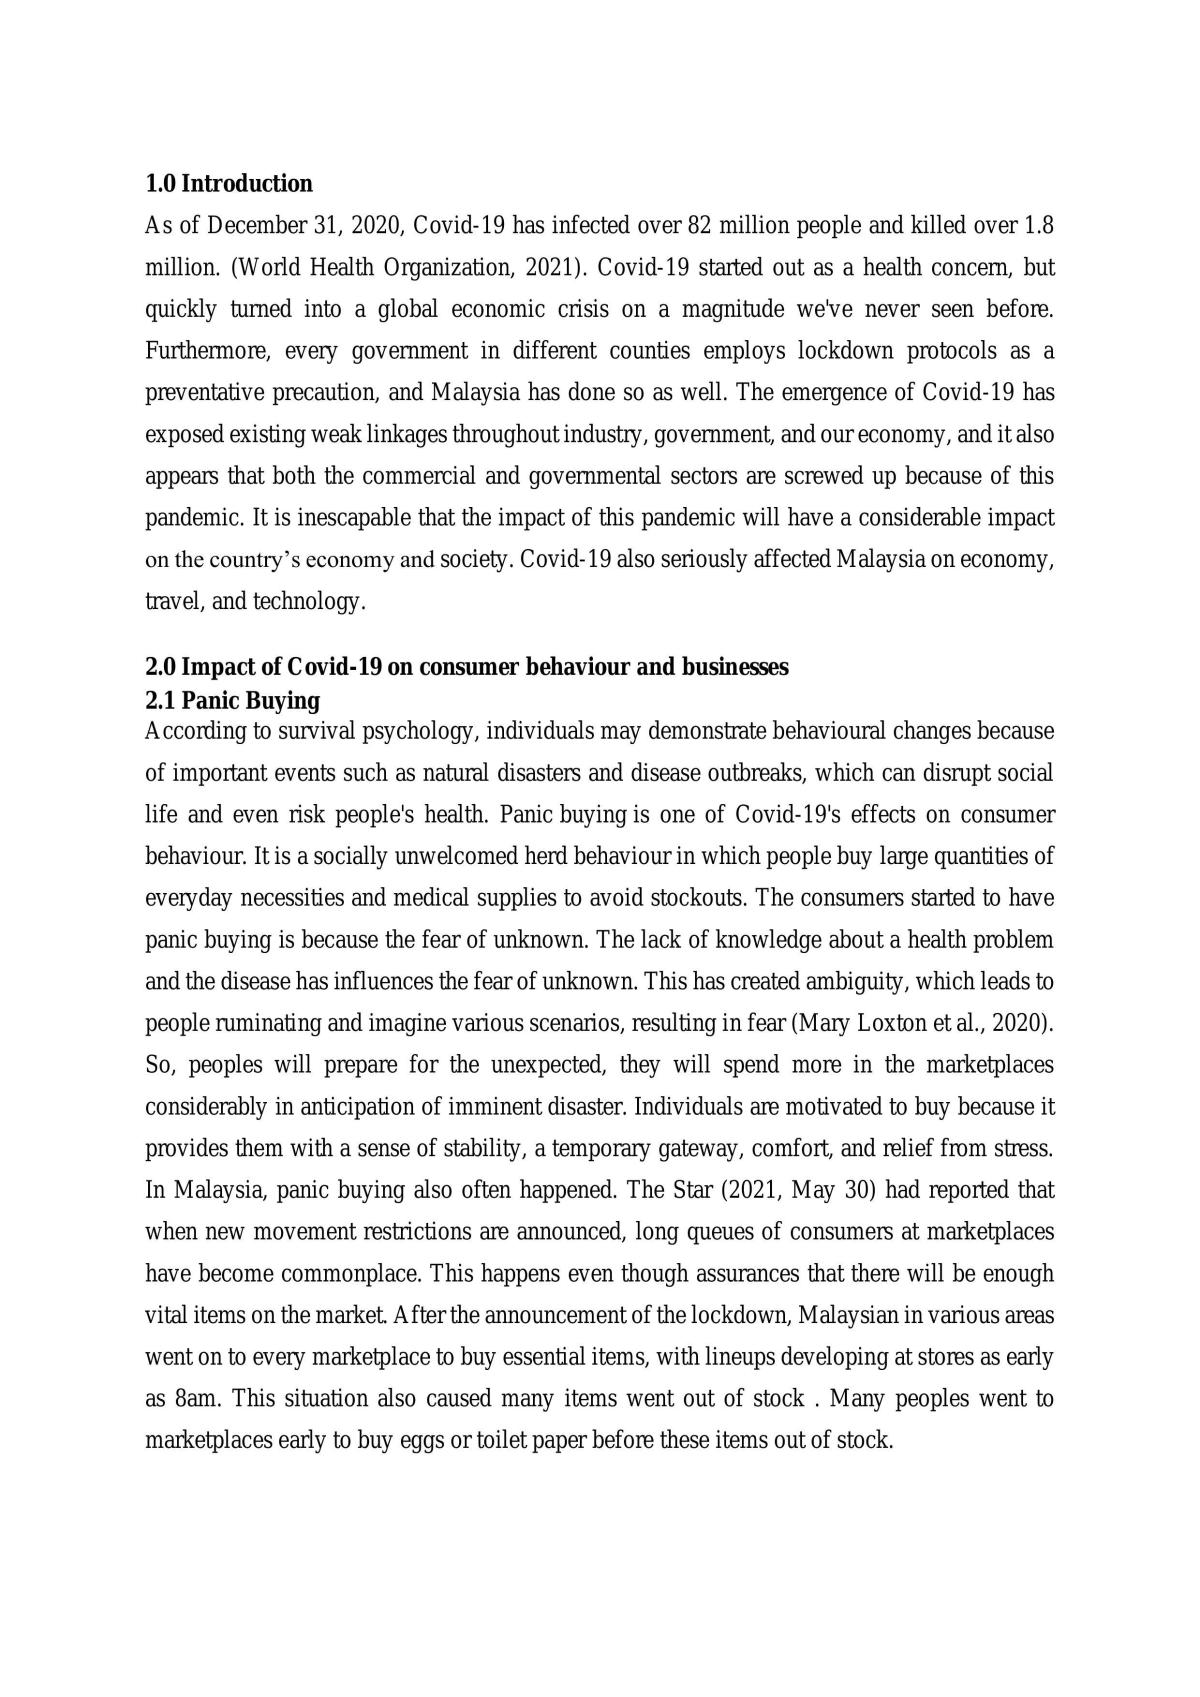 Impact of Covid-19 on consumer behaviour and businesses - Page 1